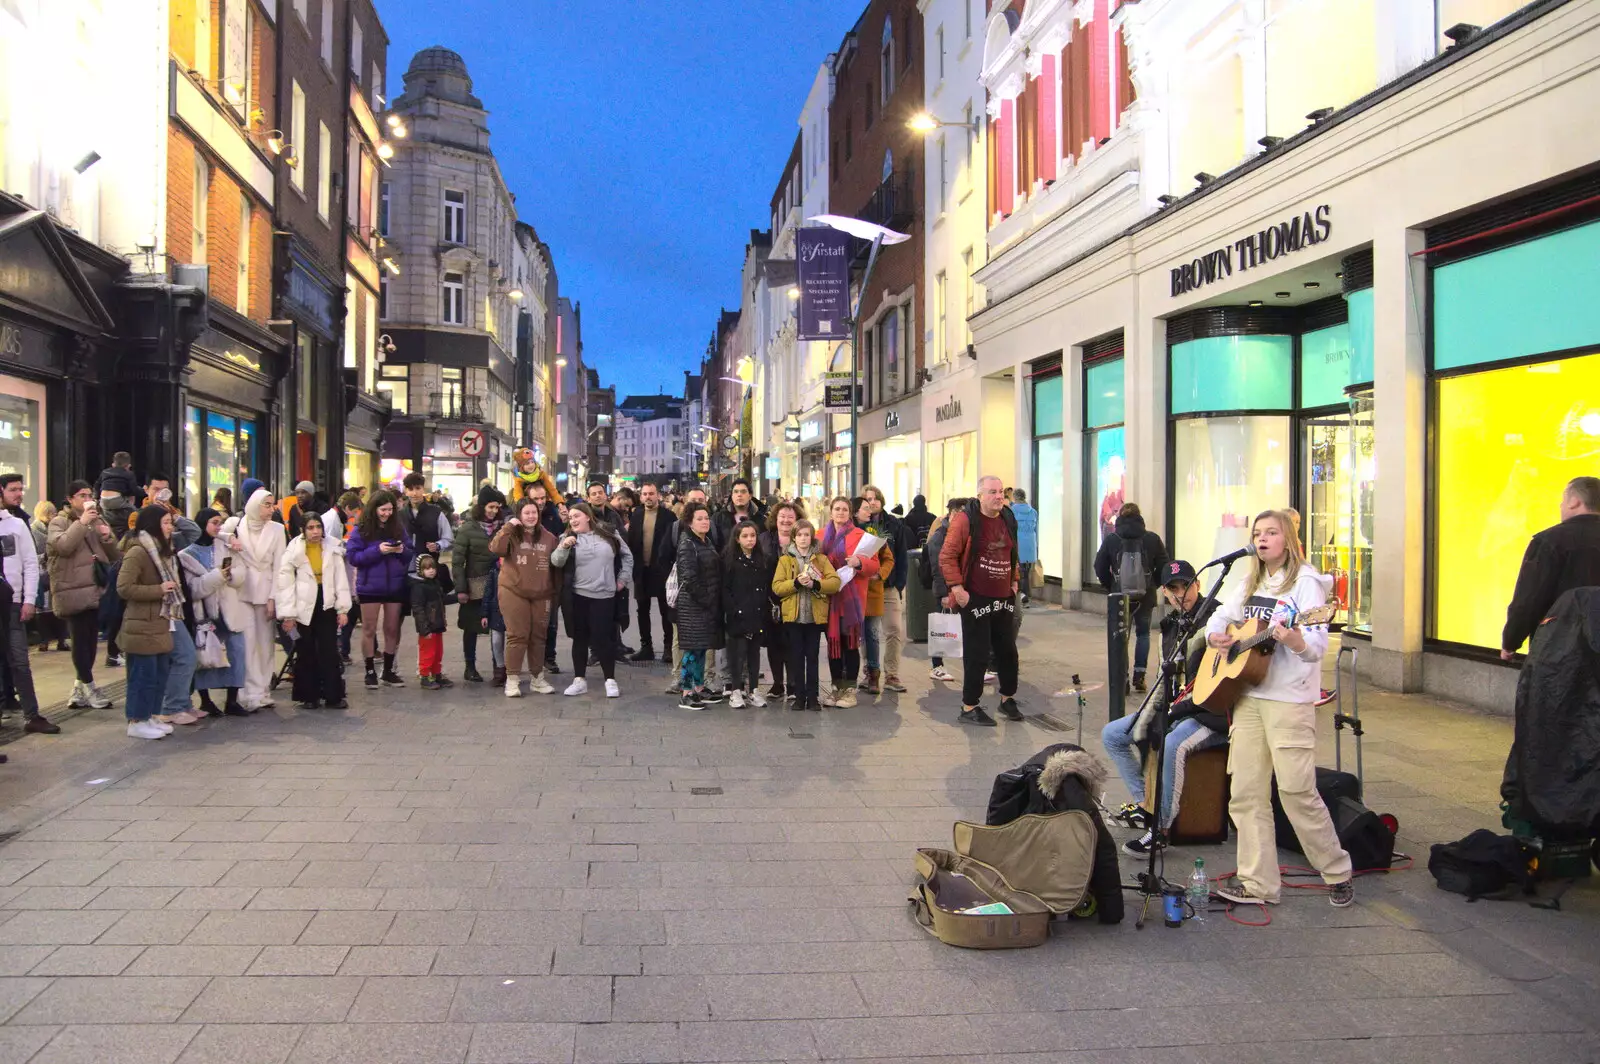 The buskers on Grafton Street, from The Dead Zoo, Dublin, Ireland - 17th February 2023